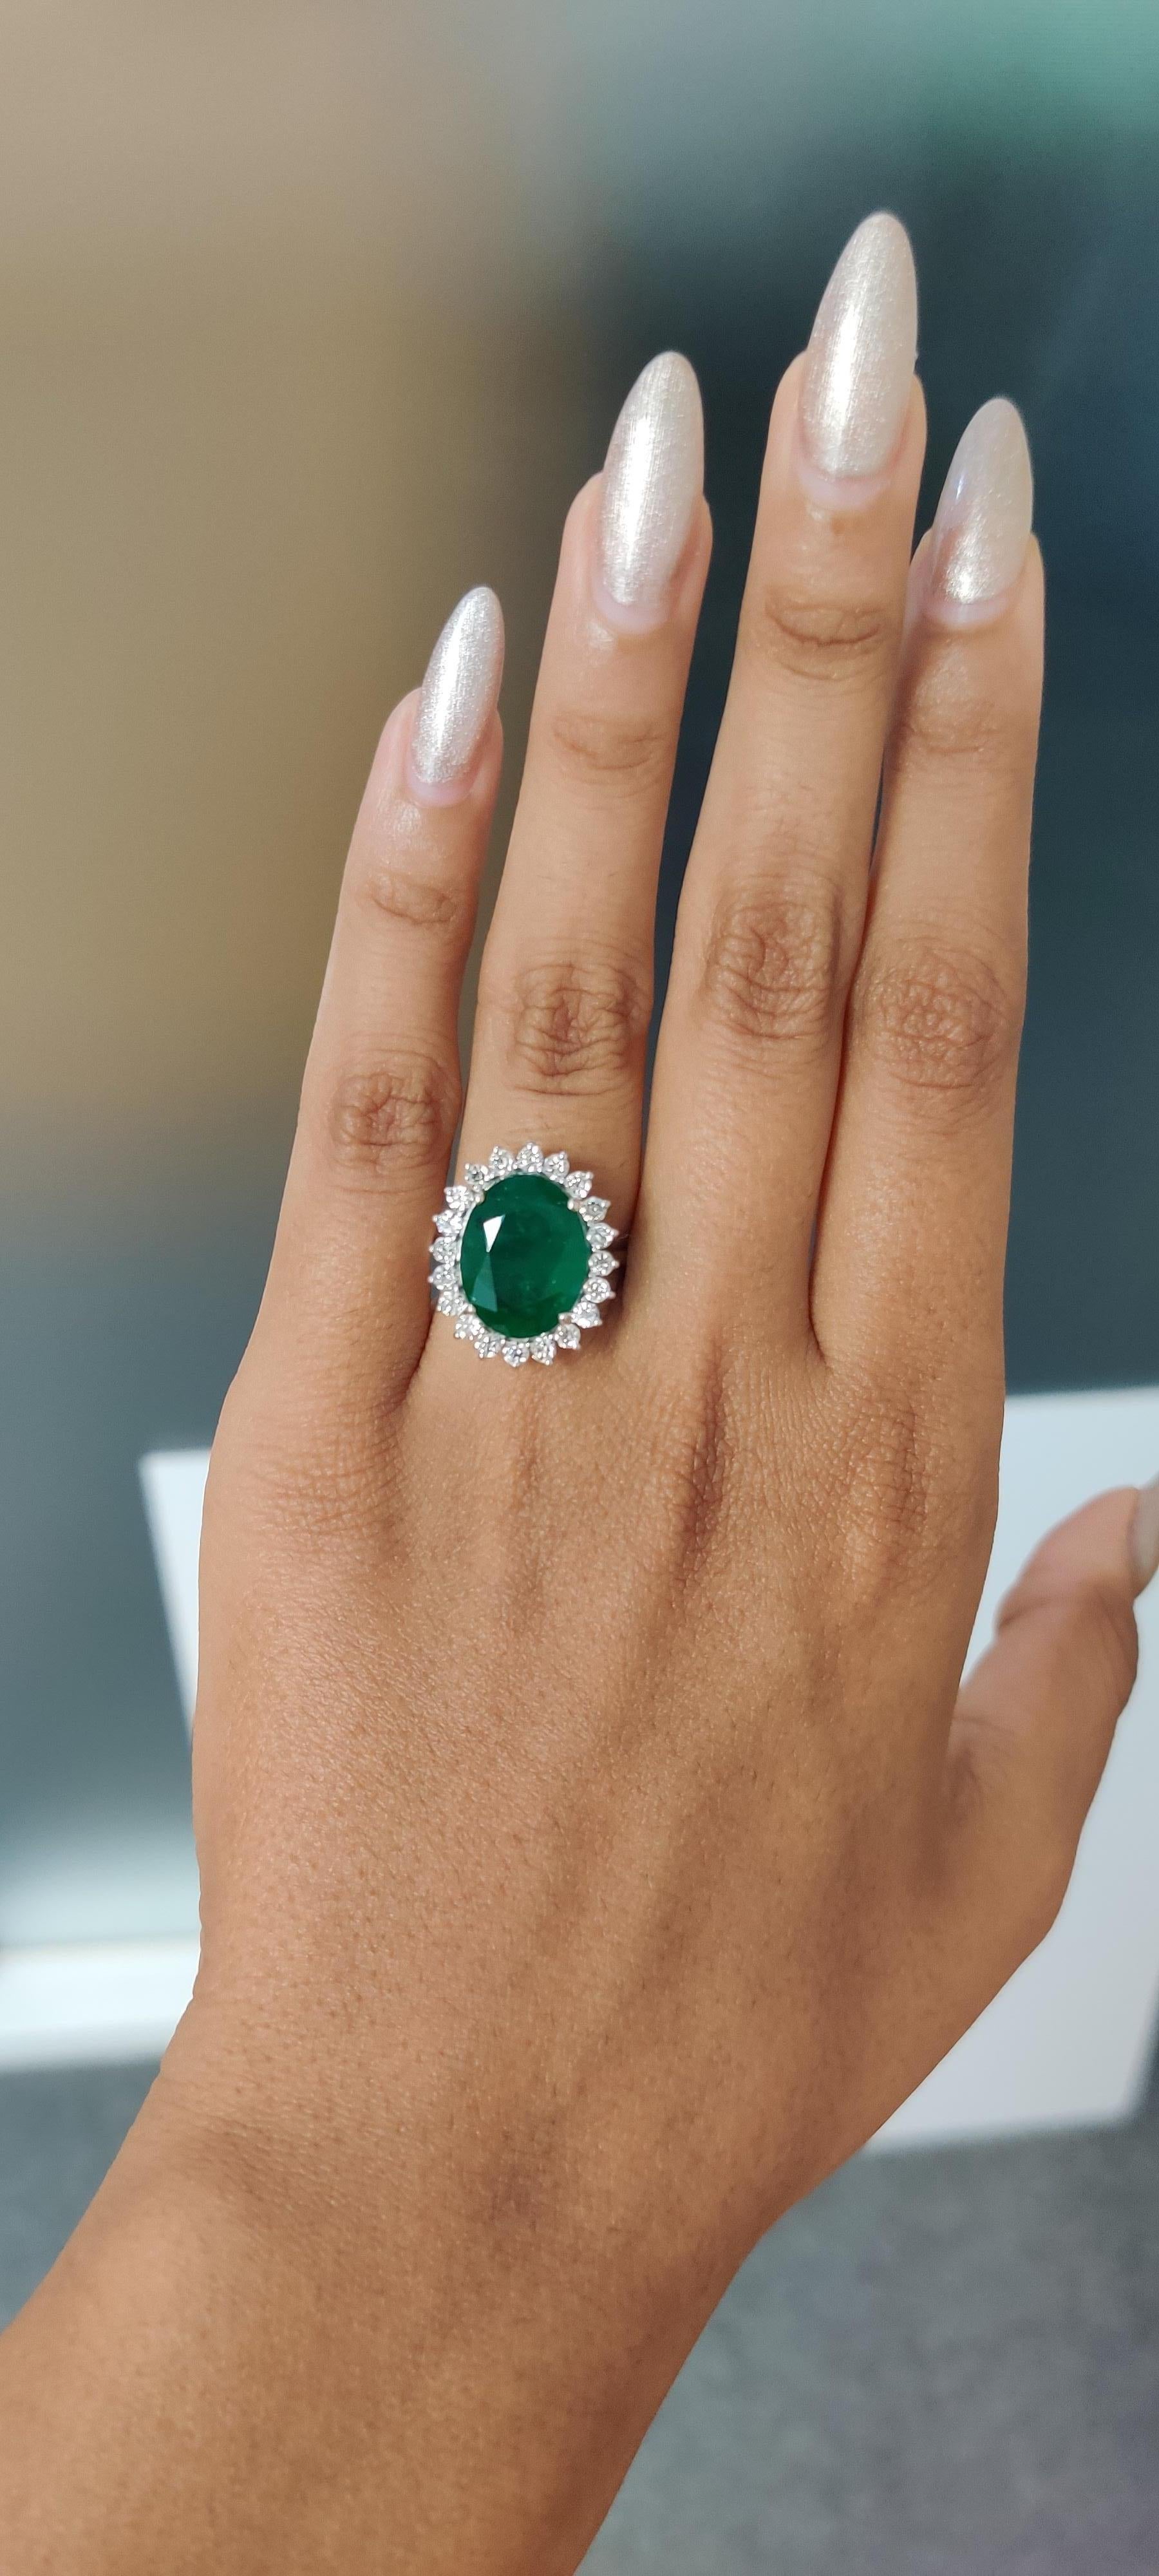 Women's or Men's Christmas Special 7.11 Carat Zambian Emerald Ring with Old Cut Diamonds